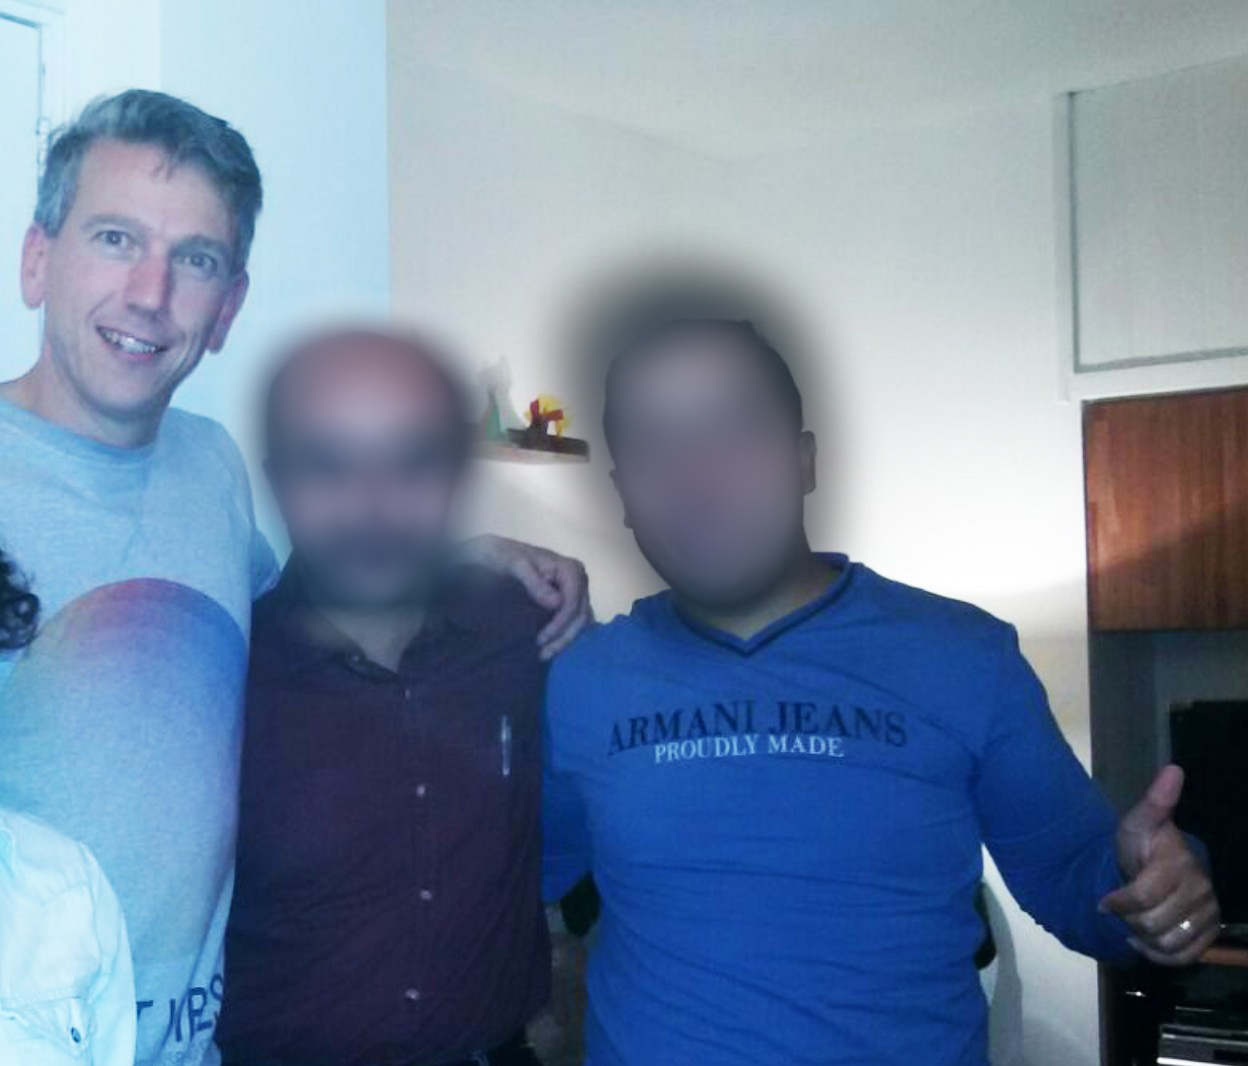 From left to right: Michiel (founder BrightVibes) and brothers Ammar and Rami. Image is blurred to not compromise their family members.